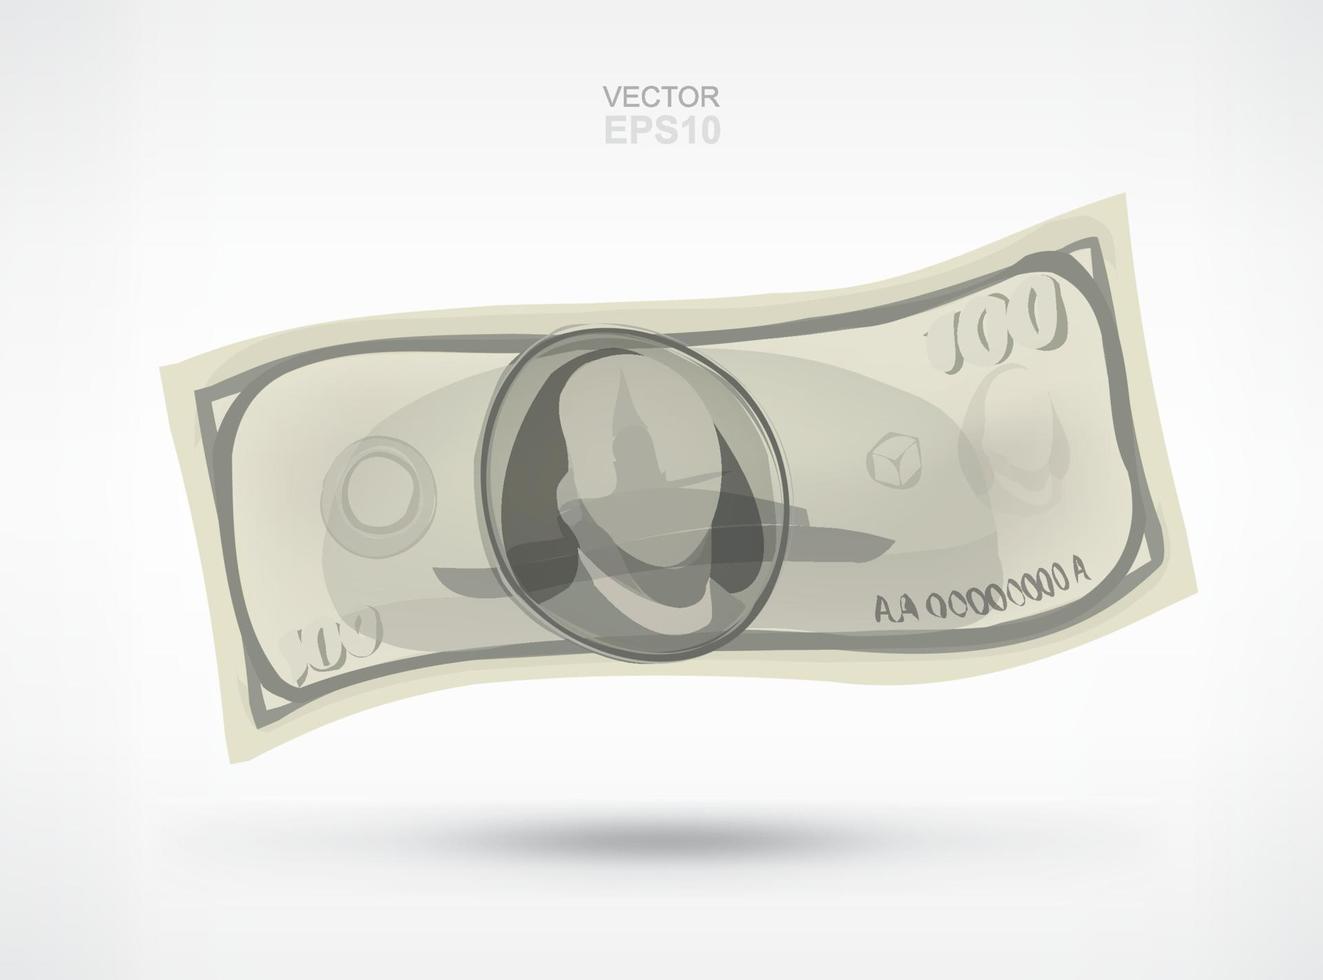 Dollar banknote on white background. Vector. vector